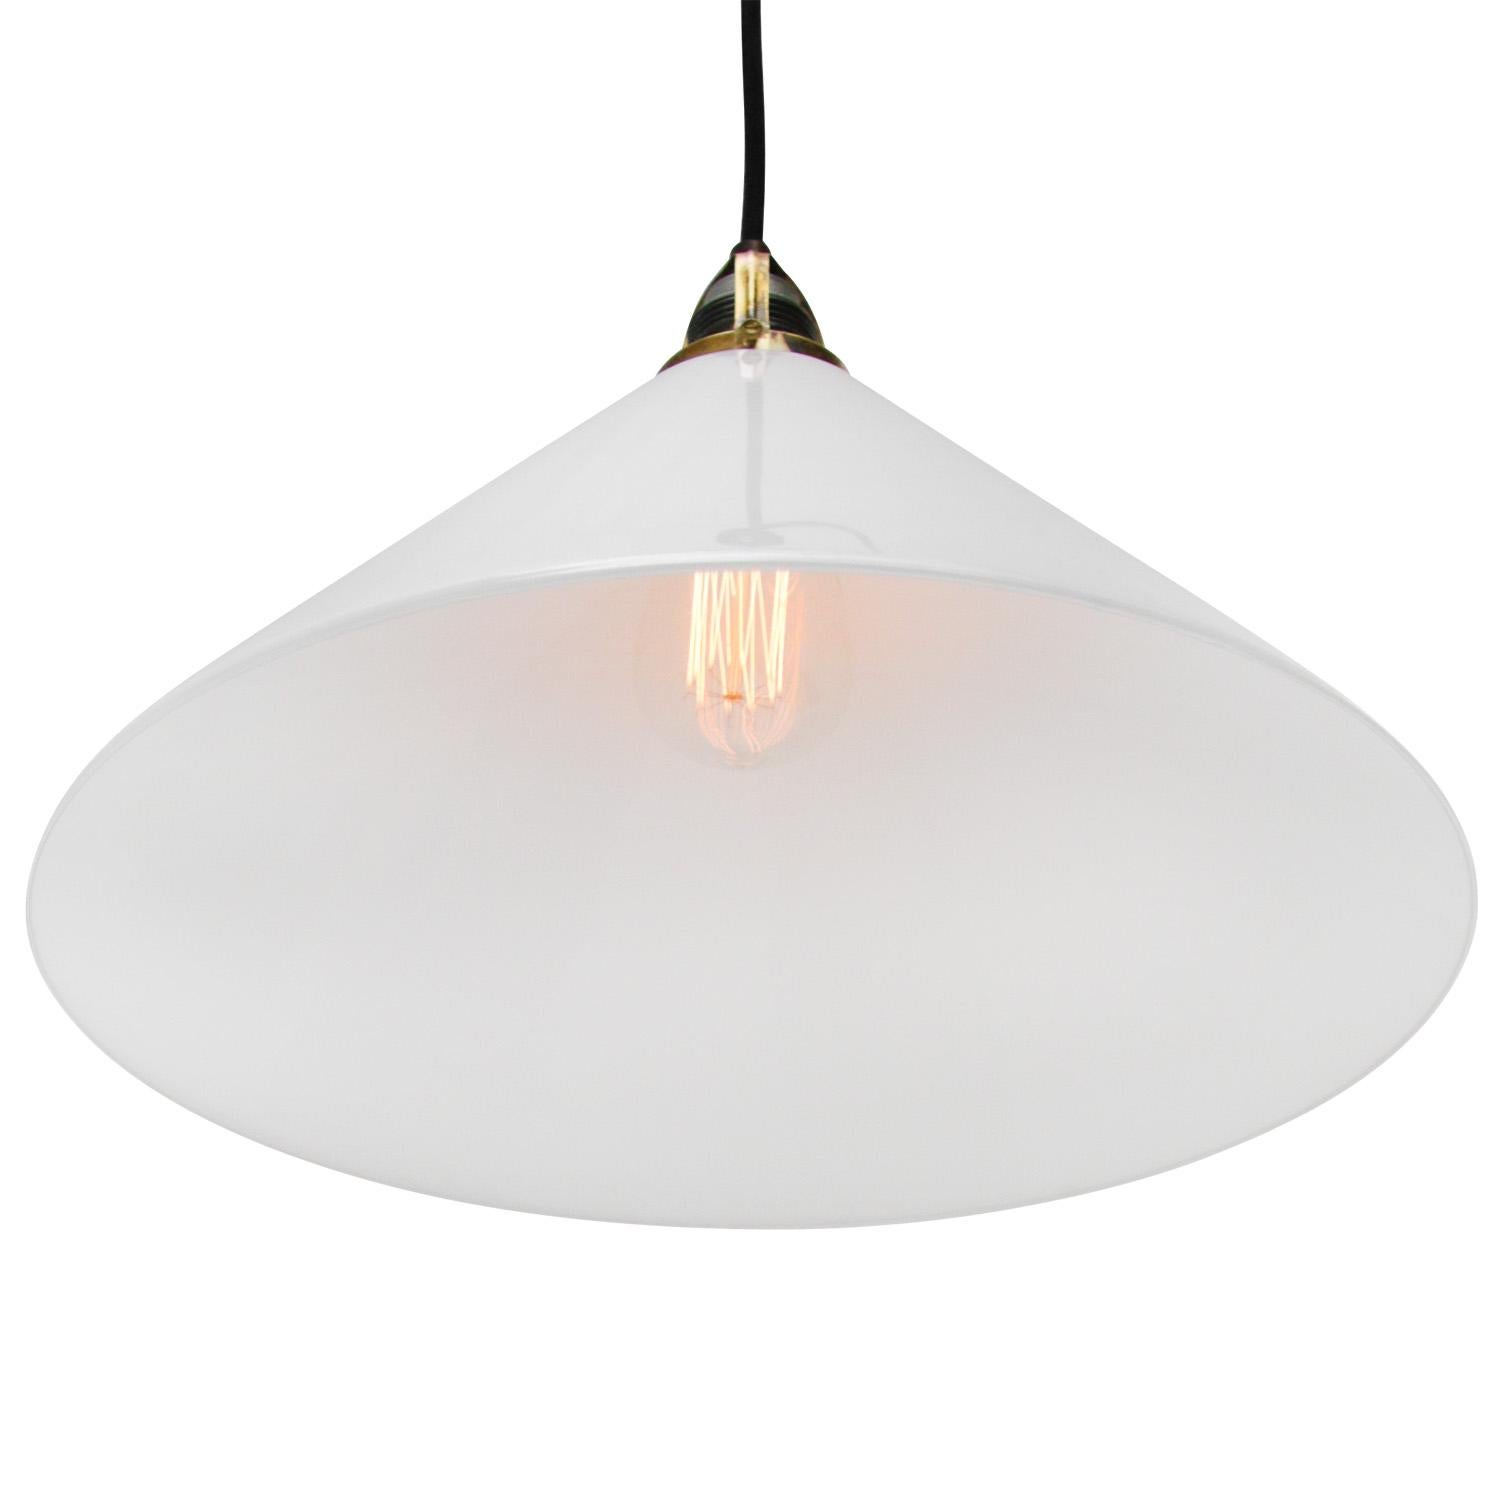 Extra large French opaline glass industrial pendant.
2 meter black cotton wire

Weight 1.28 kg / 2.8 lb

Priced per individual item. All lamps have been made suitable by international standards for incandescent light bulbs, energy-efficient and